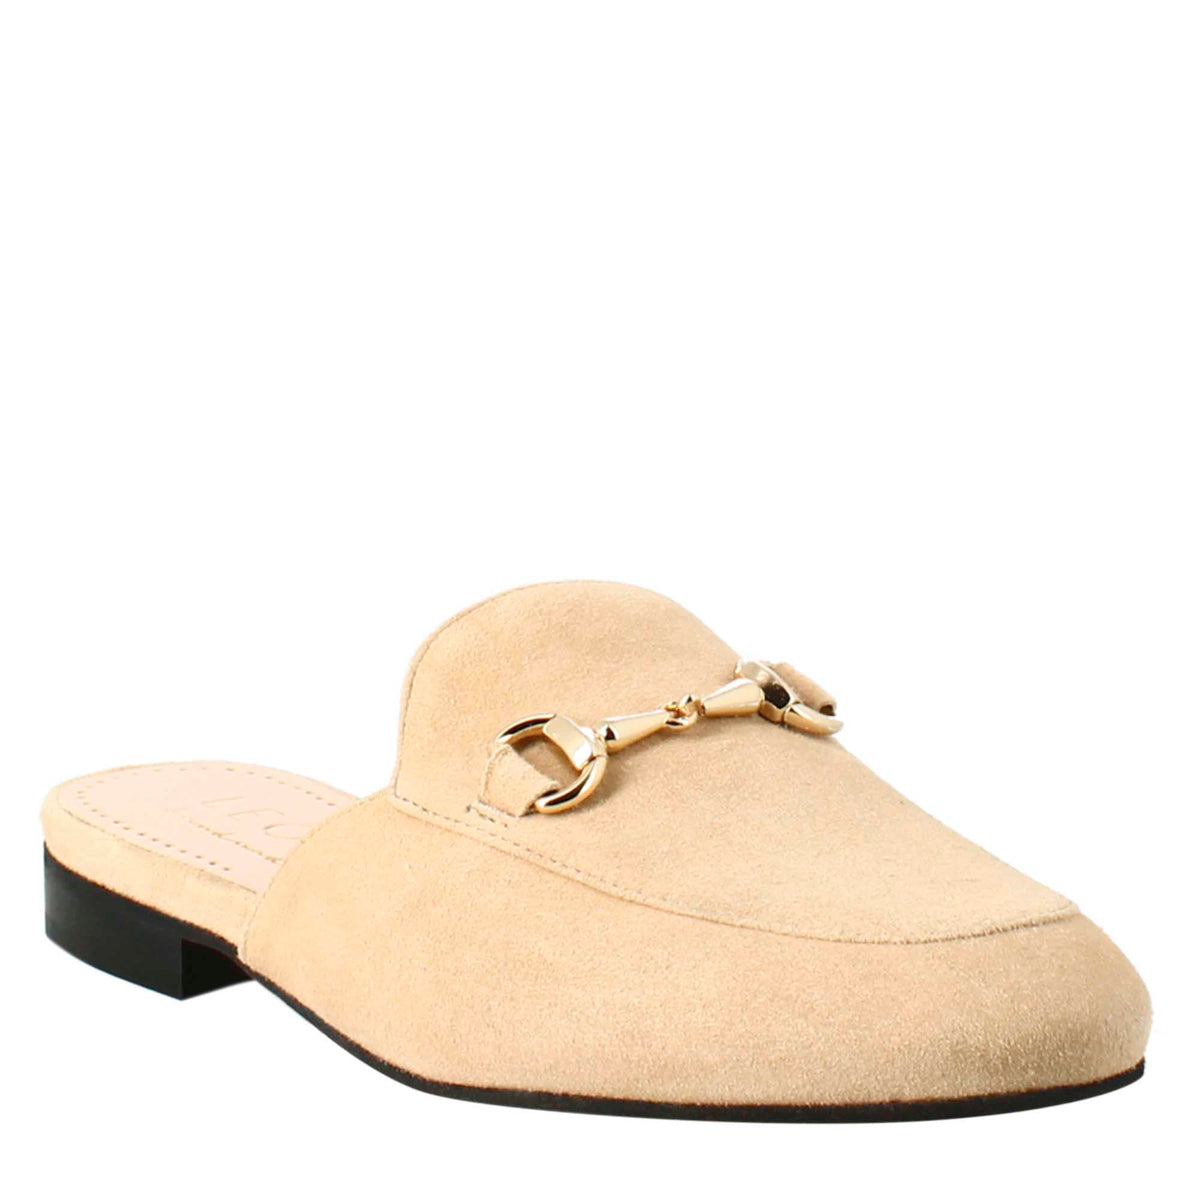 Woman's mules in beige suede with gold buckle